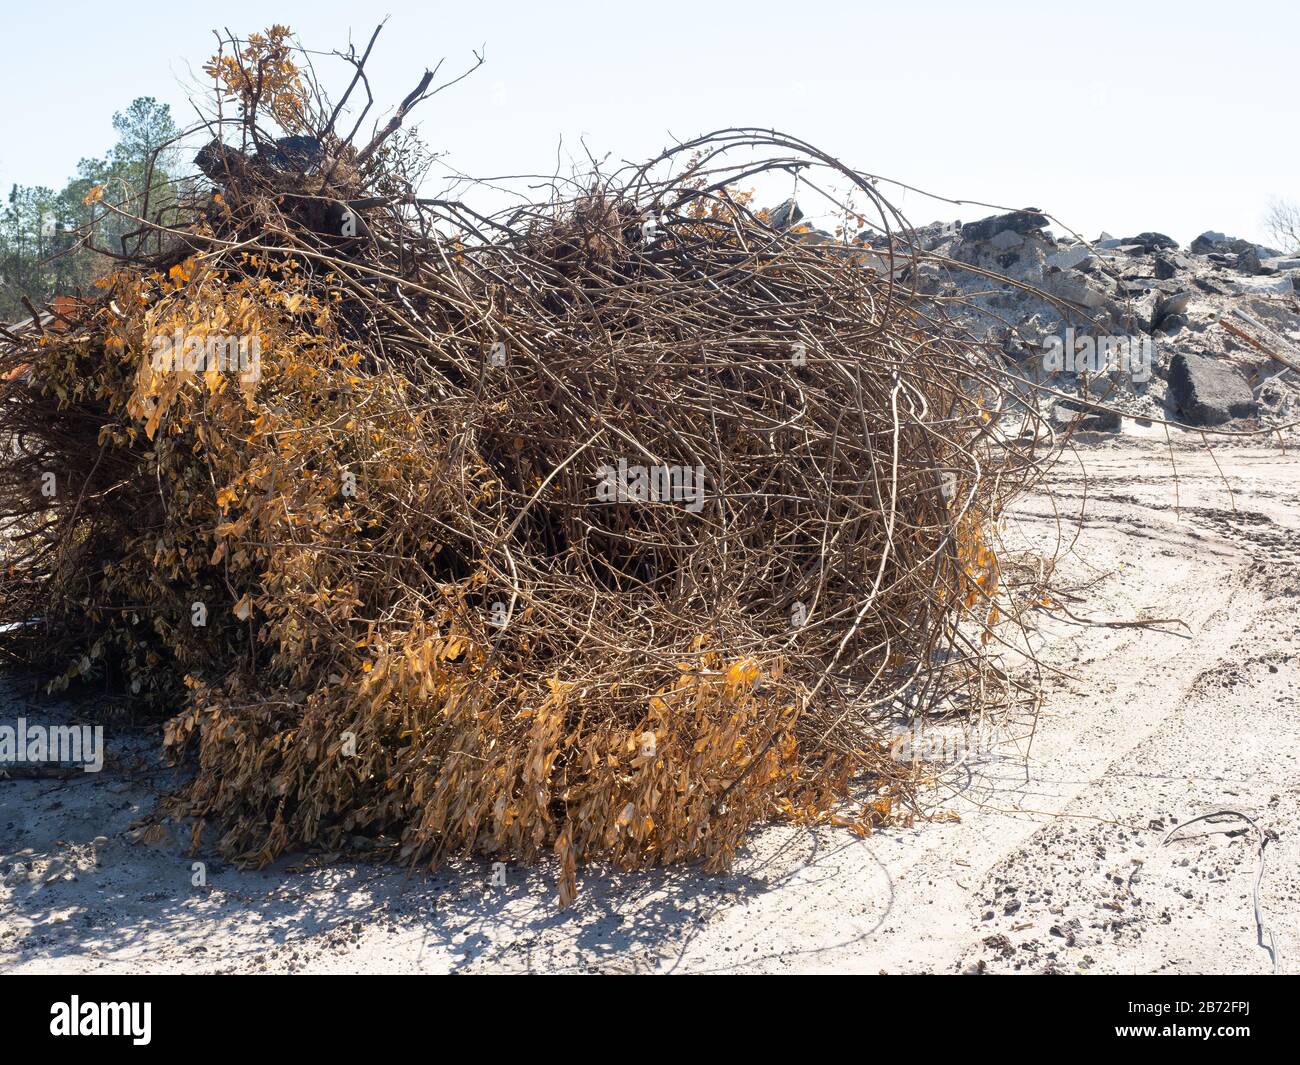 Huge Pile of Dead Trees, Shrubs, tangle of branches roots, Road Demolition Site, Equipment Tire Tracks, pile of Concrete Asphalt Rubble View #2 closer Stock Photo